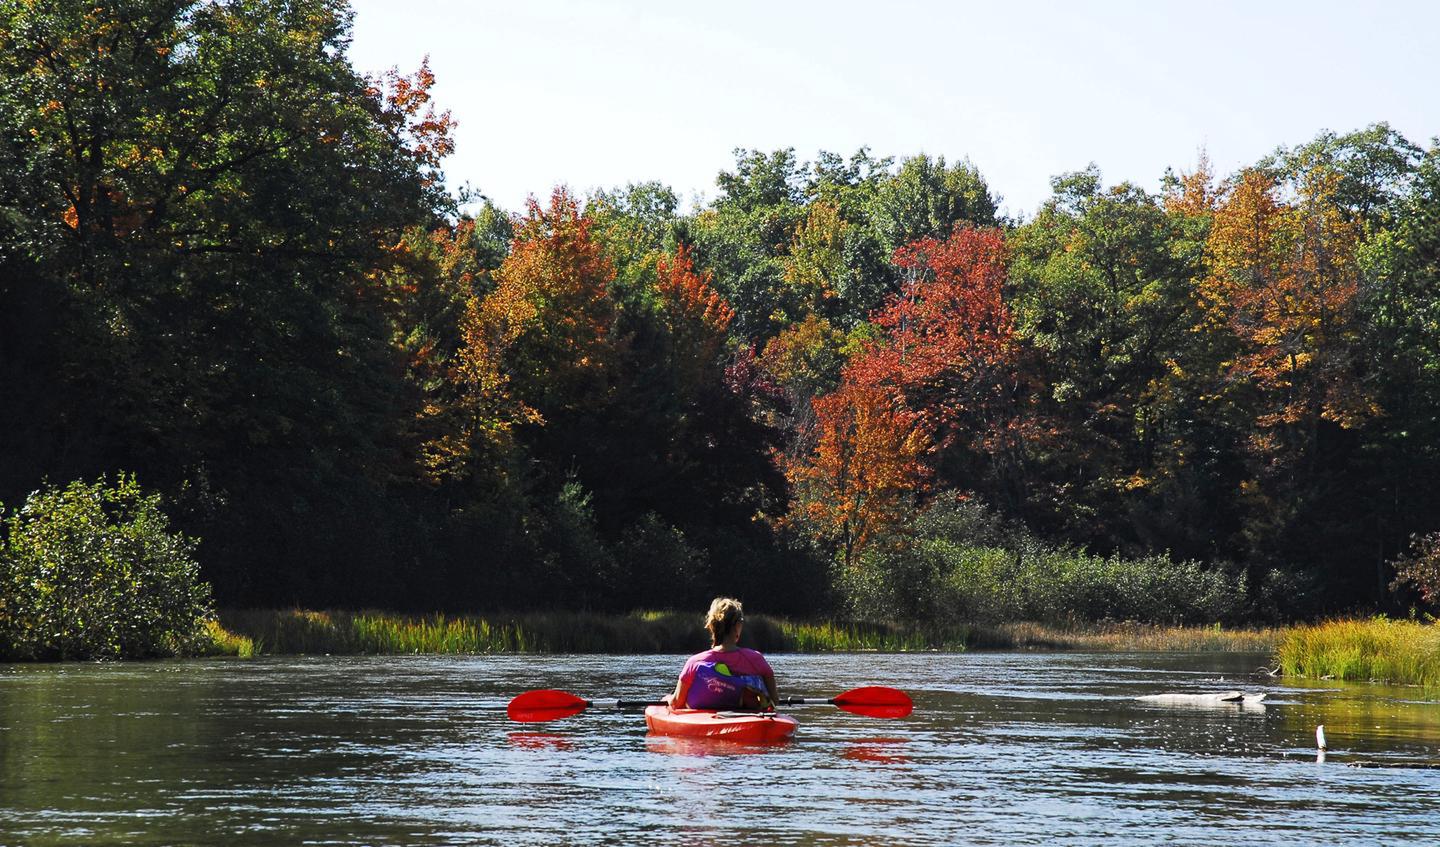 A fall paddle down the riverA quiet paddle through fall splendor.